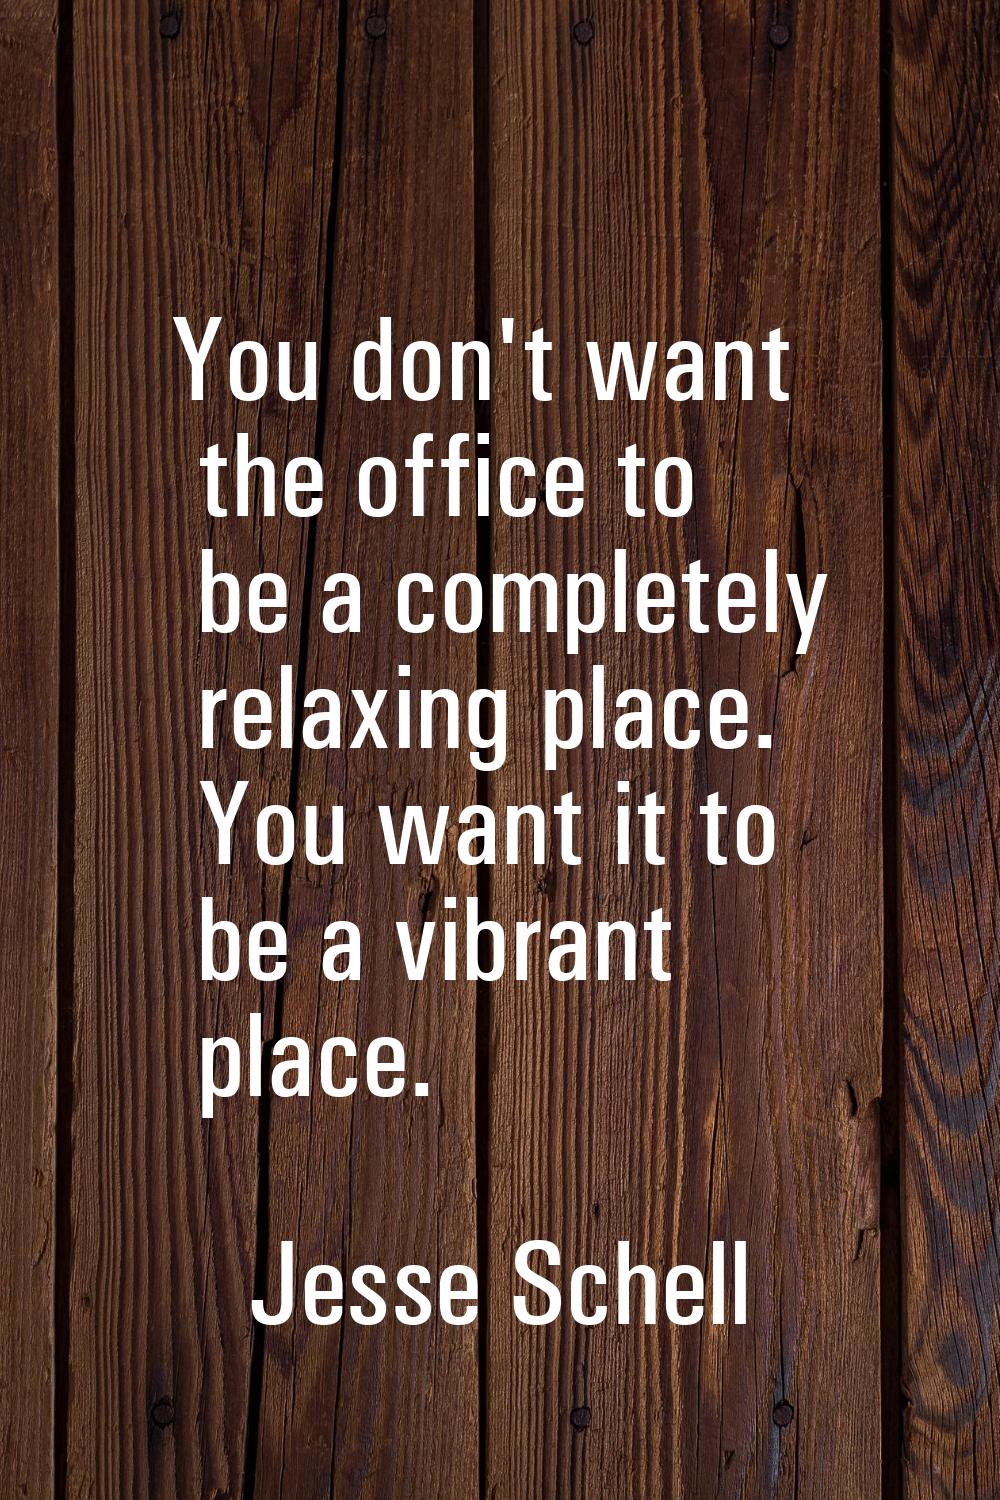 You don't want the office to be a completely relaxing place. You want it to be a vibrant place.